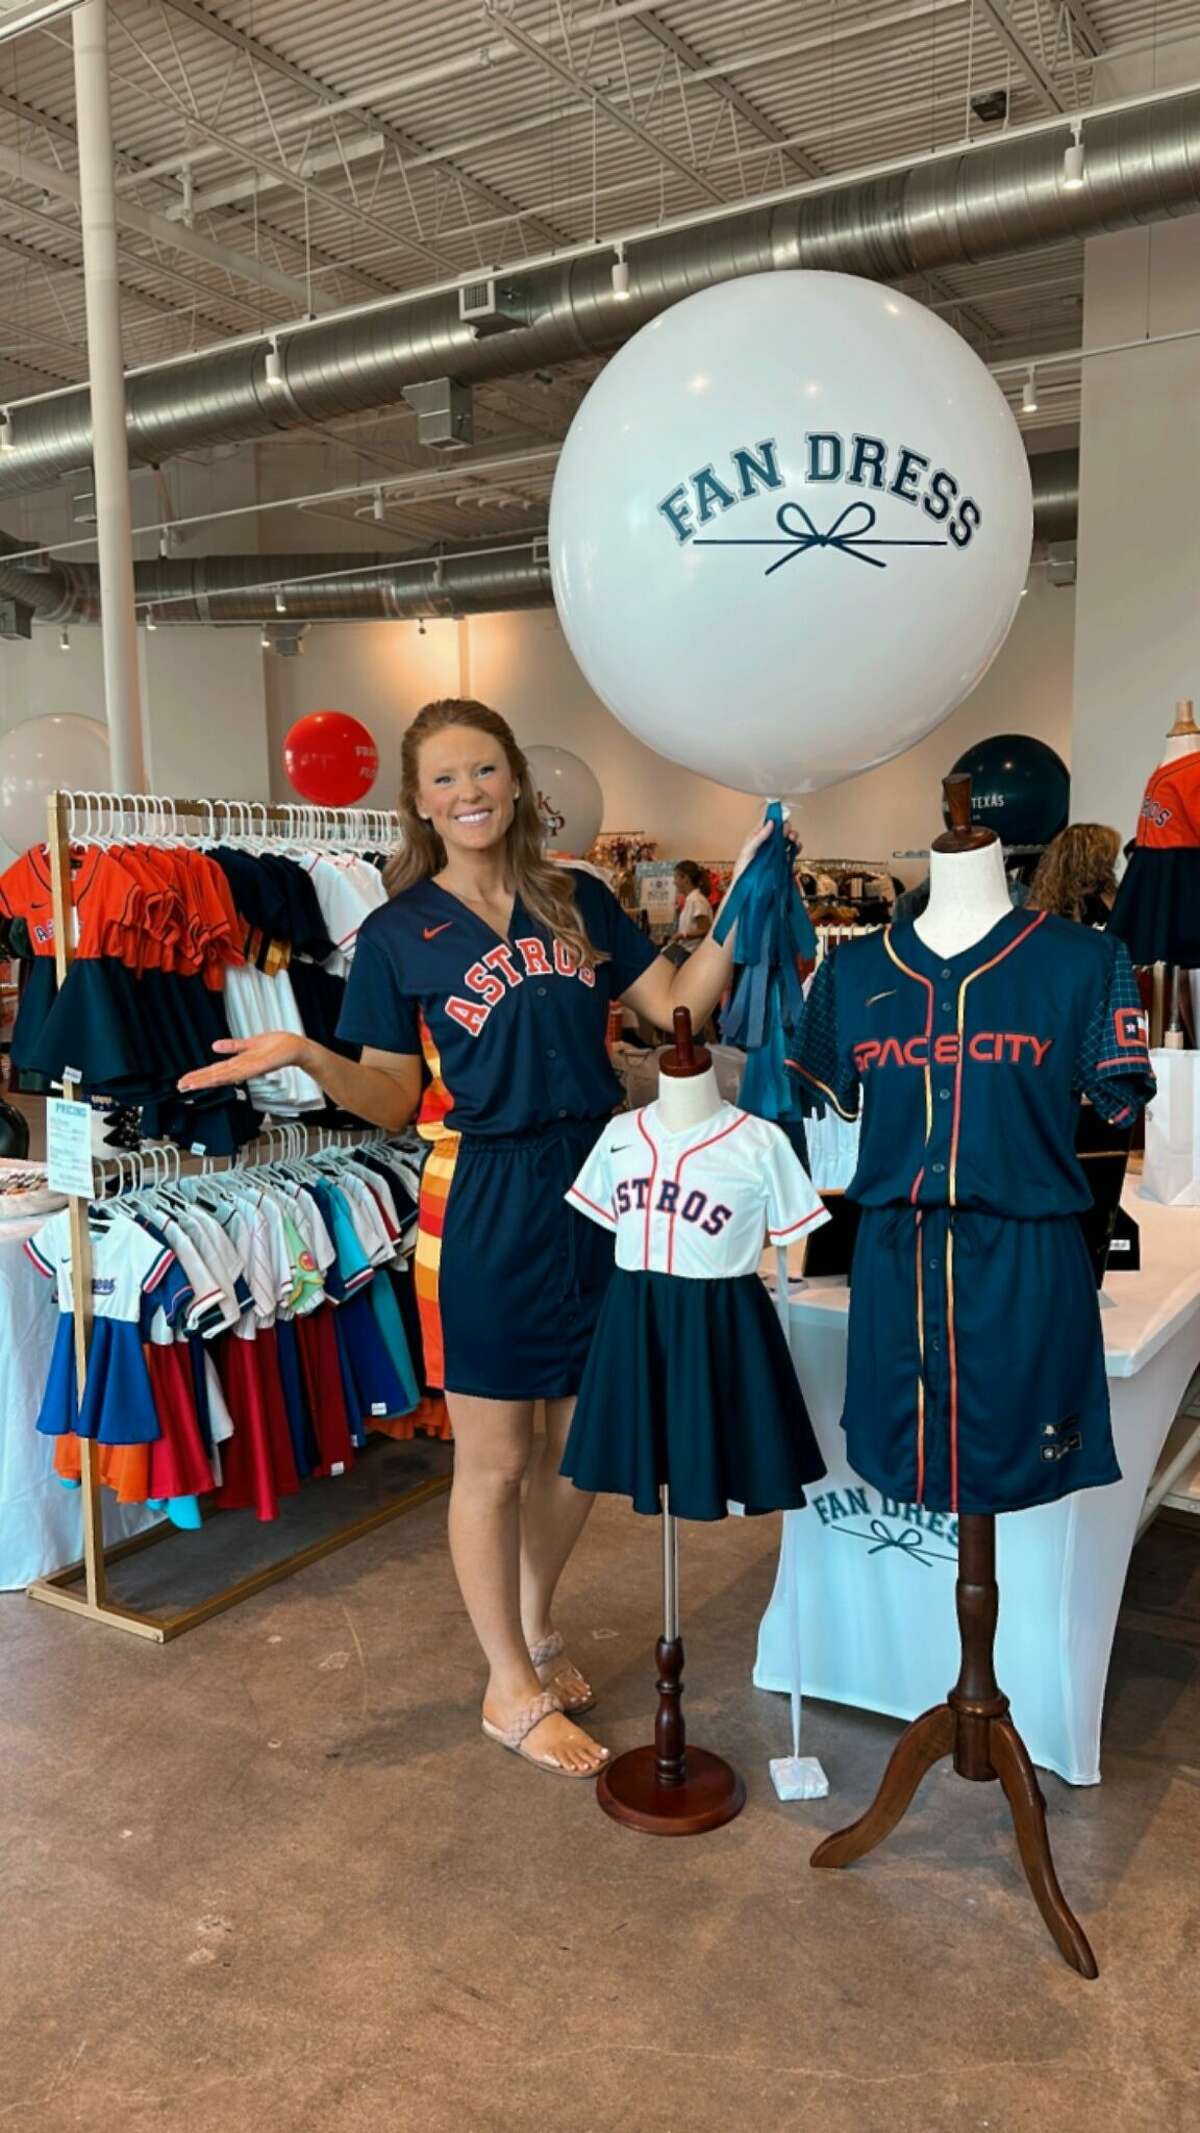 Families of Astros players wear custom dresses made by Woodlands mom